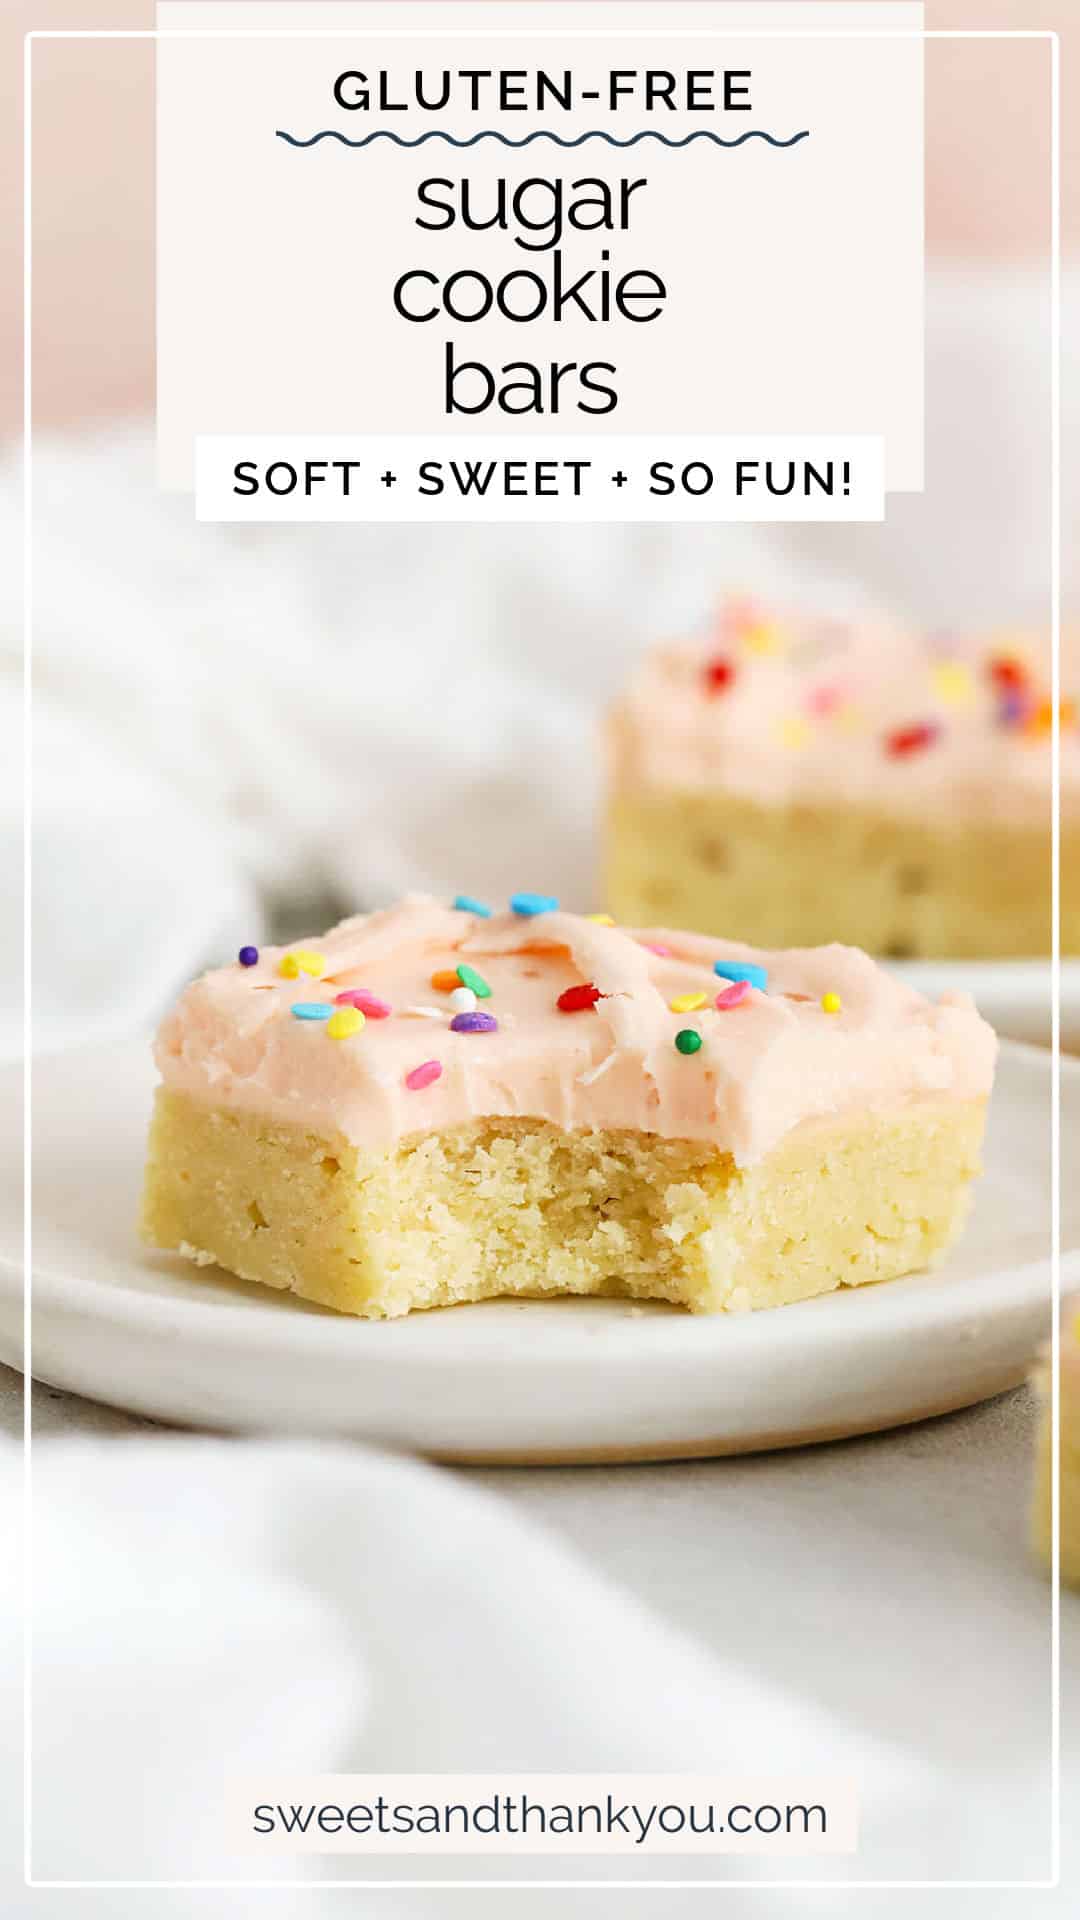 Soft, sweet, and speckled with sprinkles, these Gluten-Free Sugar Cookie Bars make for a fun treat any time! (Don't miss our favorite ways to decorate them!) / gluten free sugar cookie bars recipe / gluten-free sugar cookie bar recipe / gluten-free cookie bars / gluten-free sugar cookies / gluten-free bar cookies / gluten-free desserts / gluten-free sugar cookie bars with pink frosting / pink frosting for sugar cookies / holiday sugar cookie bars / gluten-free Christmas sugar cookie bars